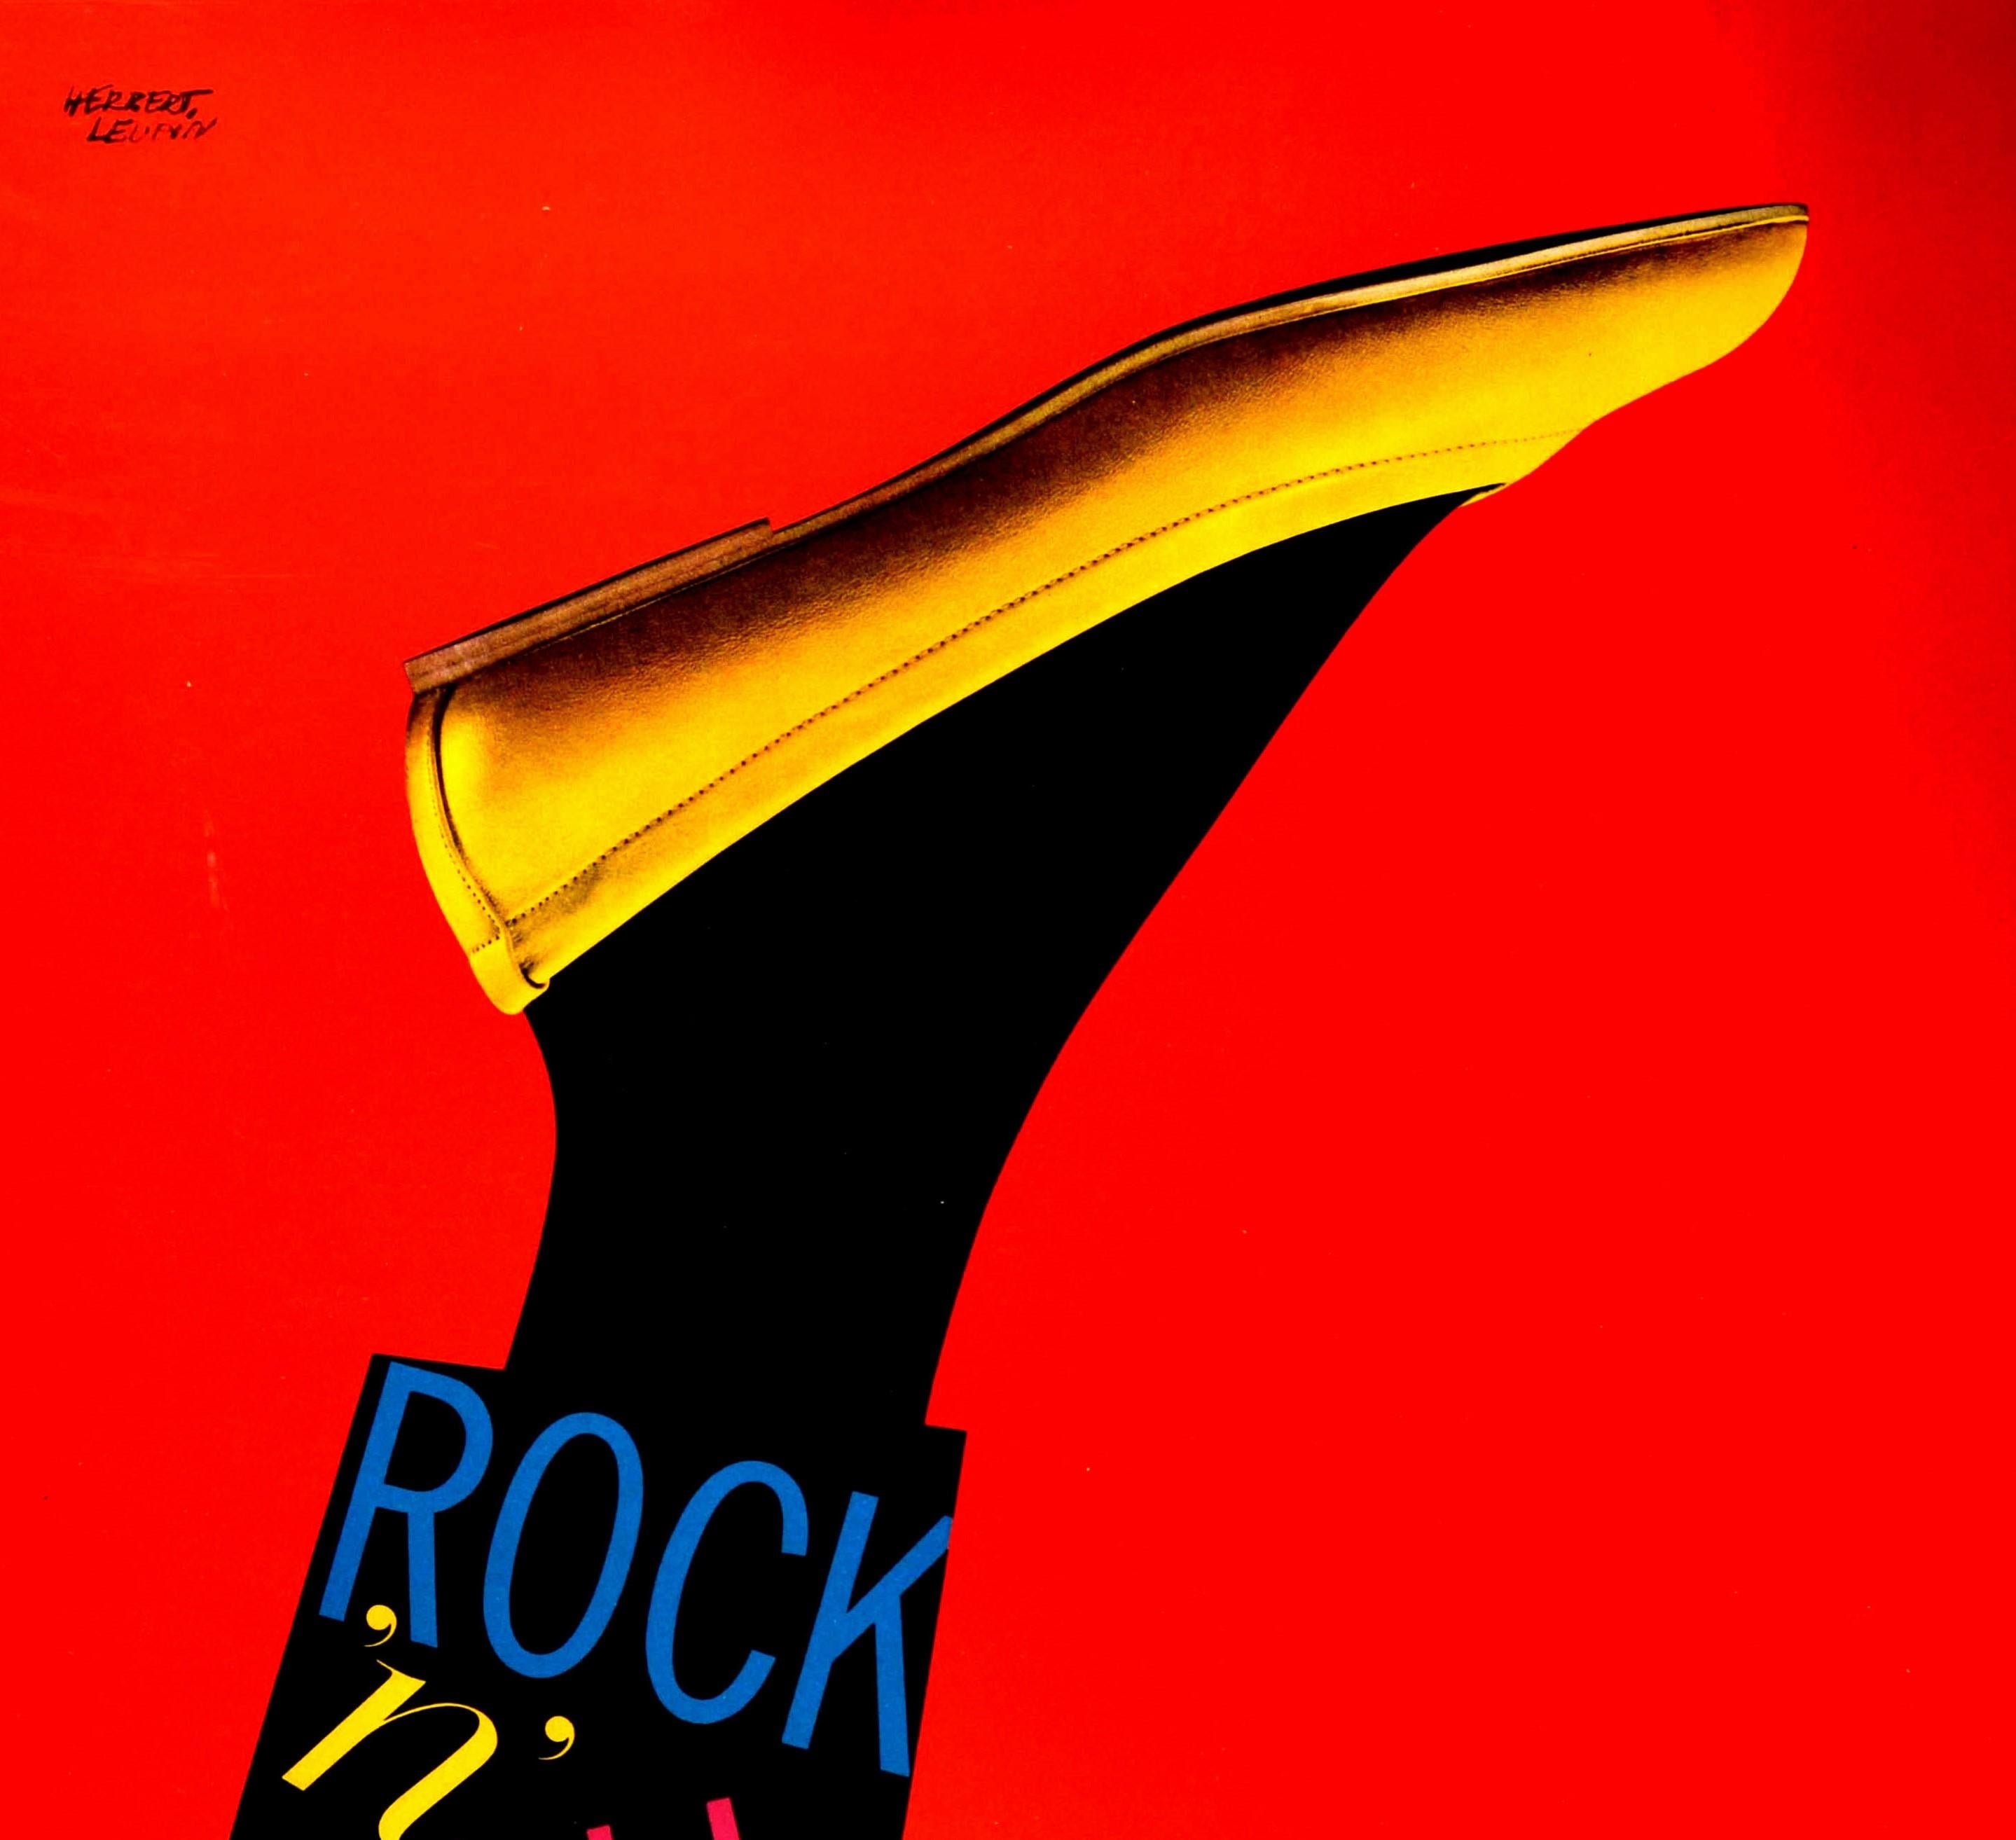 Original vintage advertising poster for Bata Shoes Swiss Made 1490 Rock n Roll featuring great artwork by the notable Swiss graphic designer Herbert Leupin (1916-1999) of a fashionable yellow gold ladies shoe on a red background with the colourful